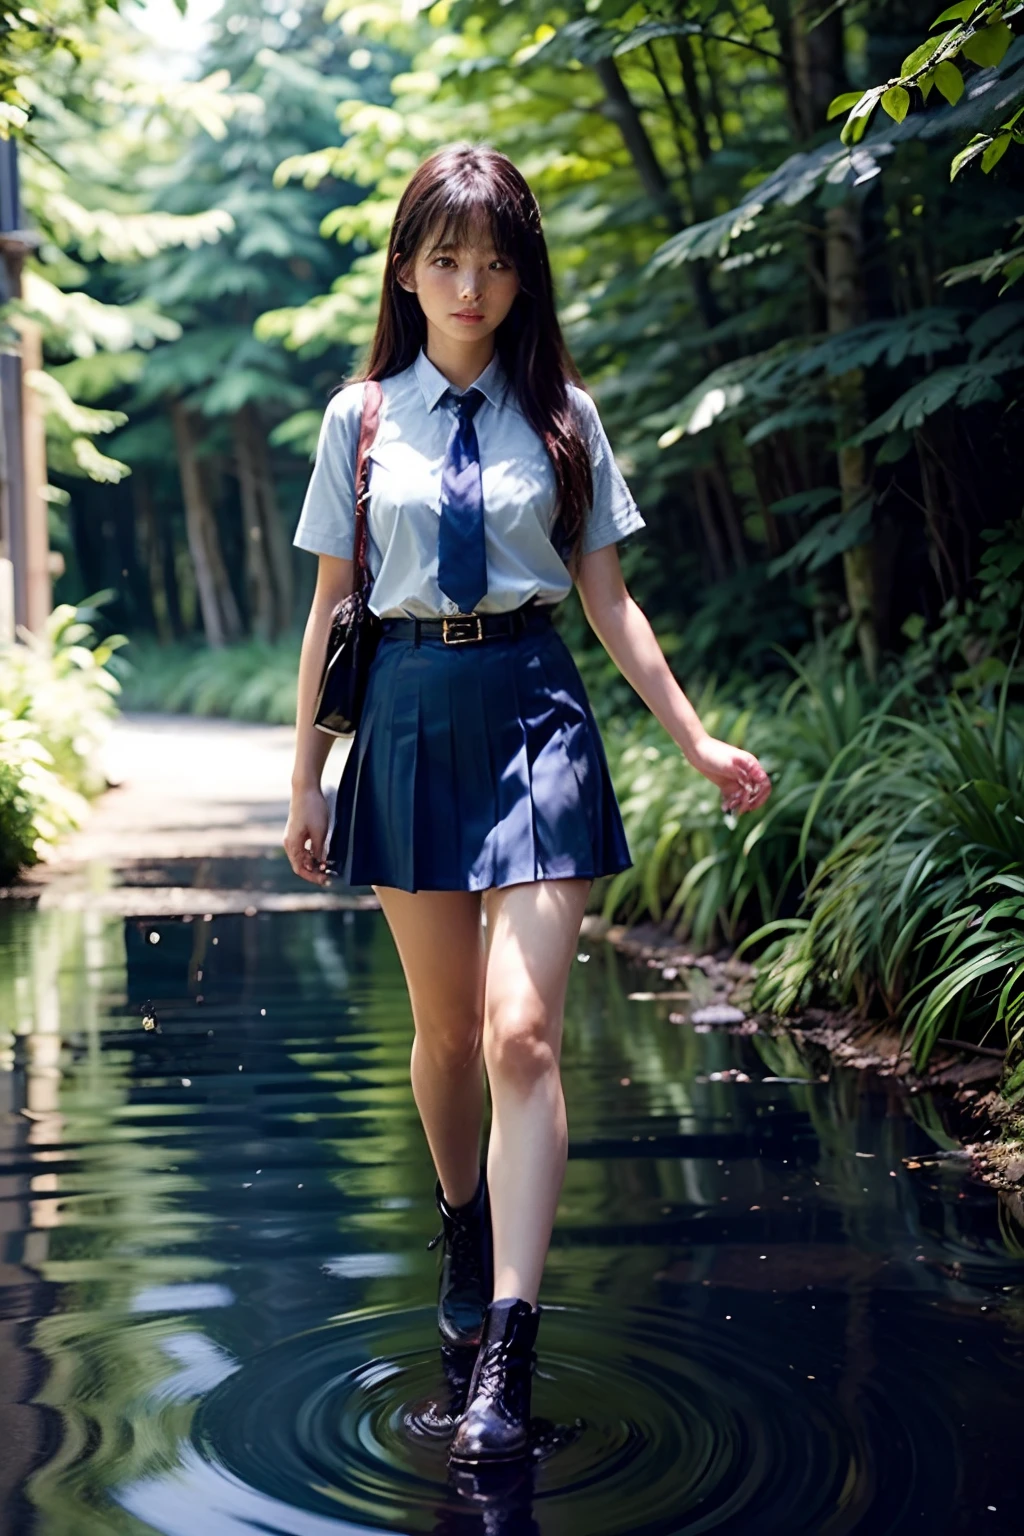 ​masterpiece、high-level image quality、high-detail、full body Esbian、Summer uniform、Blue tie、a blue skirt、One Beautiful Girl, hi-school girl、15yo student、Hairstyle with bangs、great outdoors、Blue swamp in the coniferous forest belt、Beautiful girl walking in the water and coming here、Embarrassment、confusion、Ephemeral、dark sky、side lights、Noise Reduction、Pale and soft light、diffuse glow、